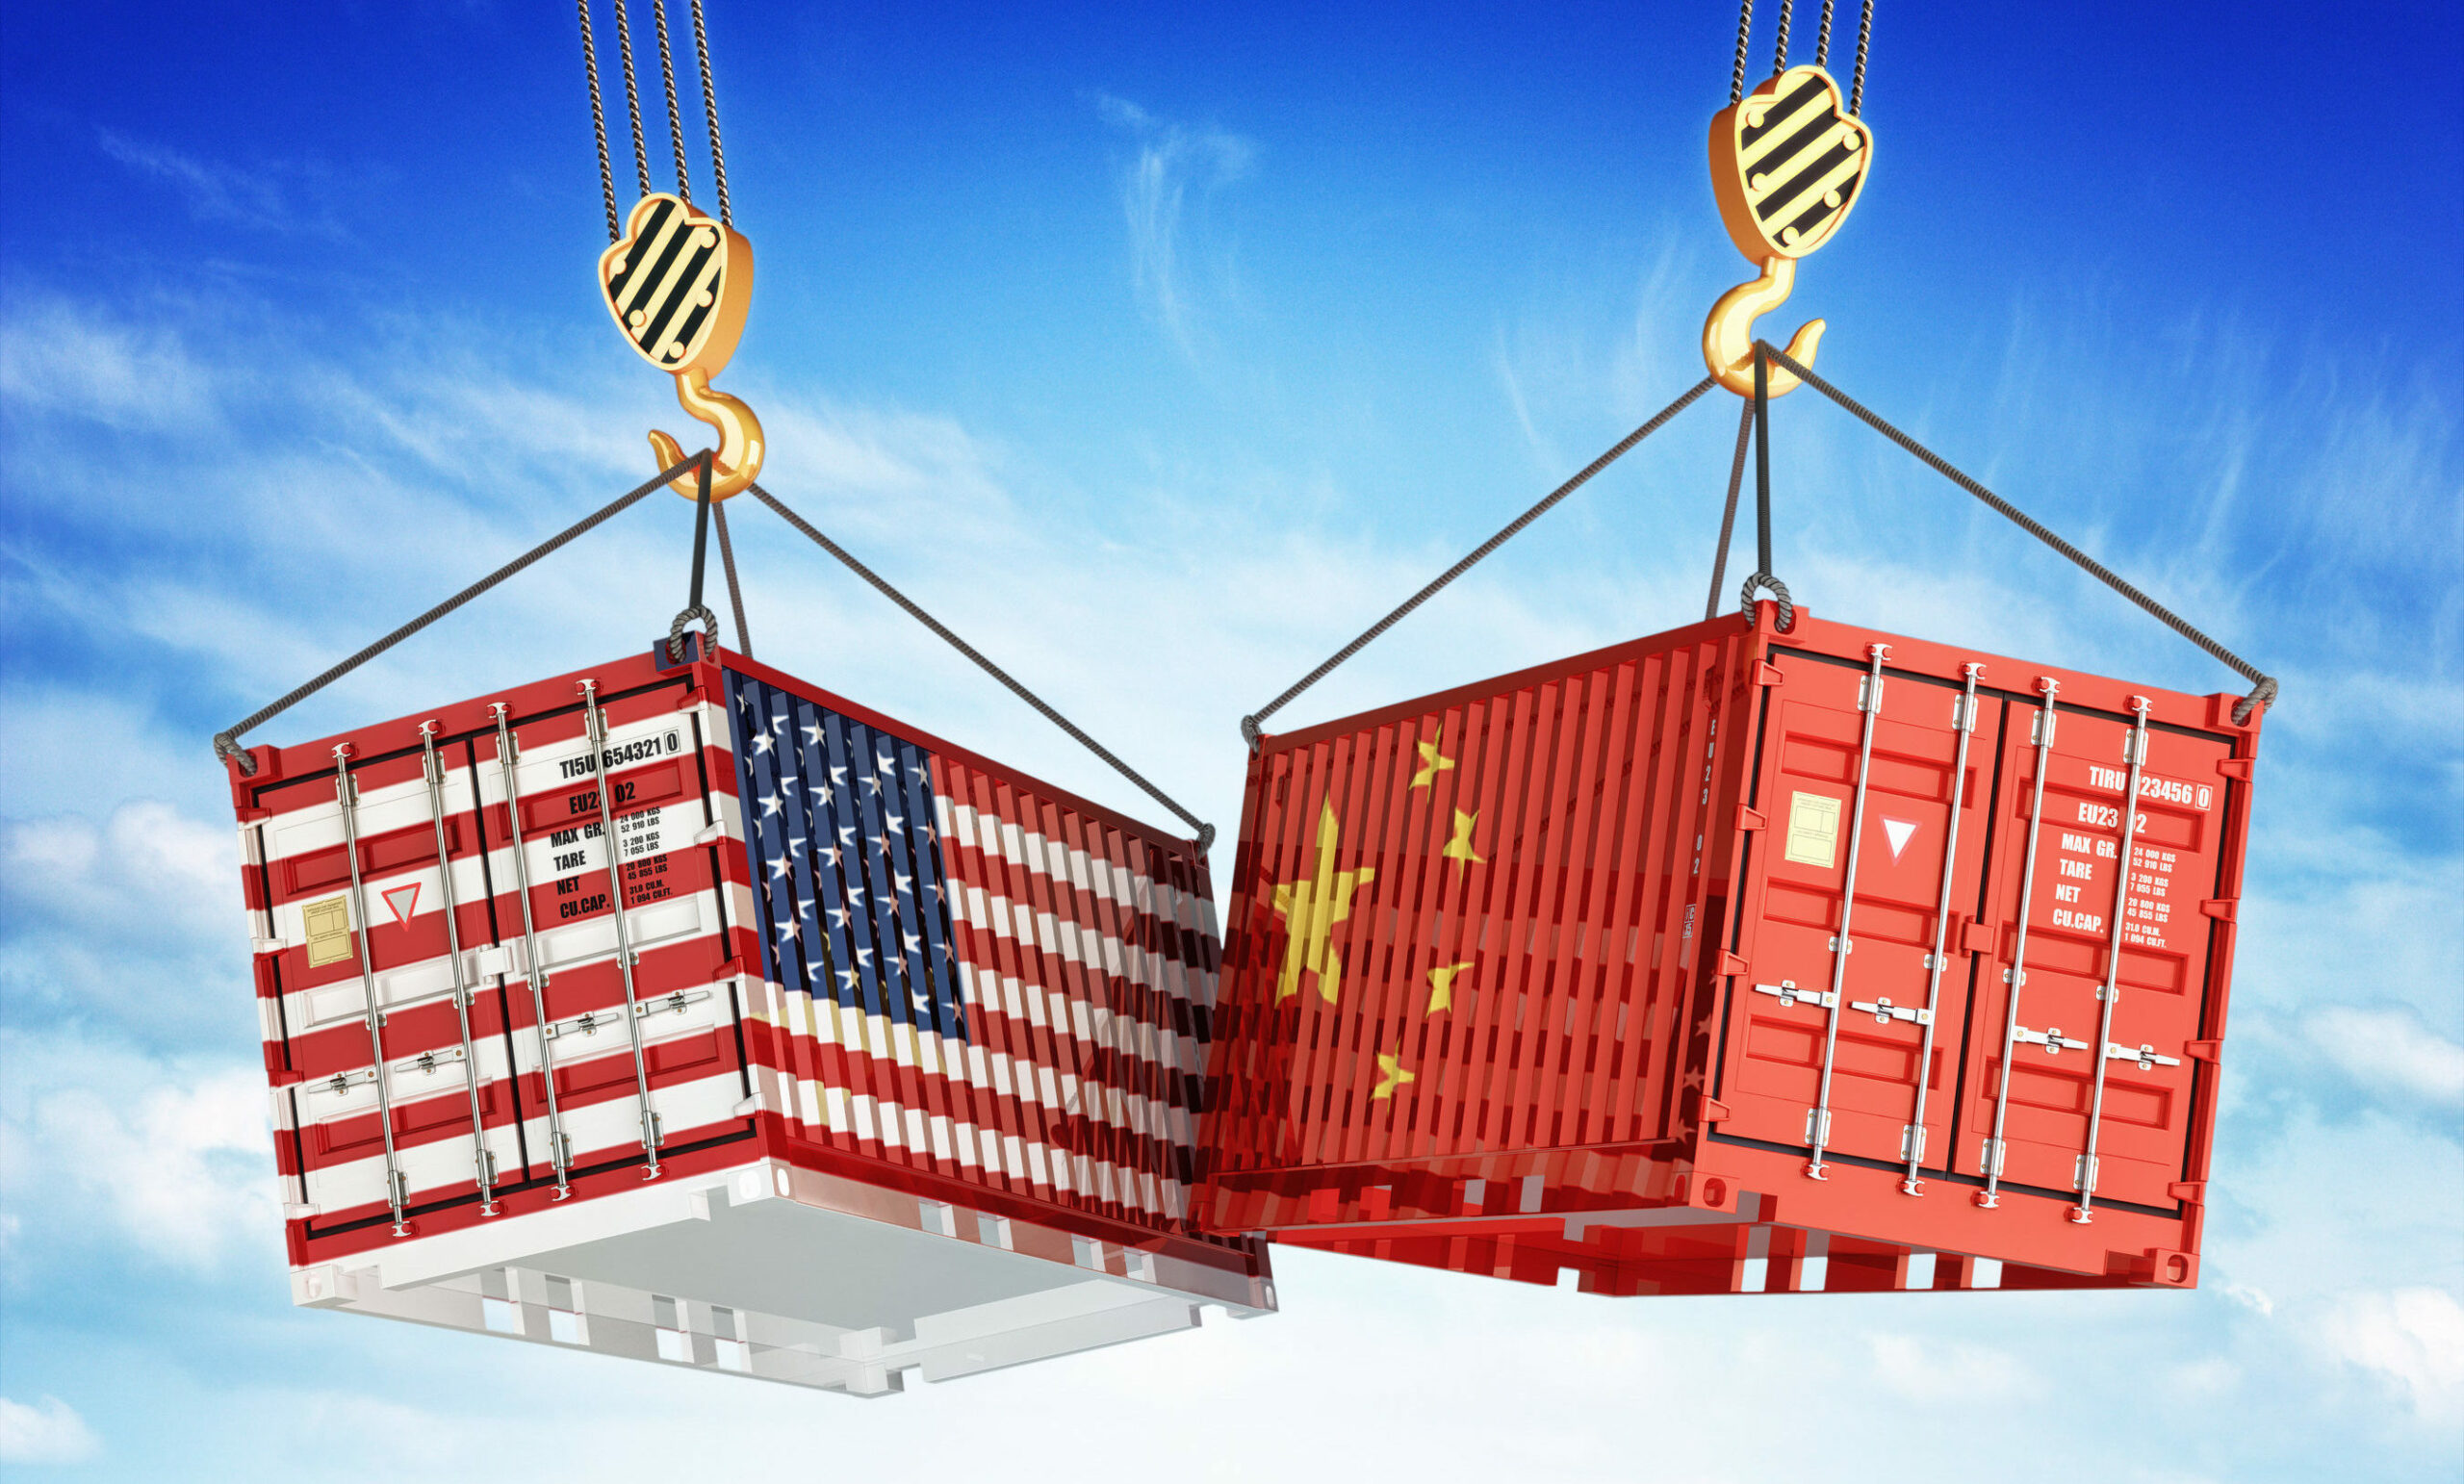 Japanese Headlines: U.S. Tariff Policies Adversely Affect MFP Industry